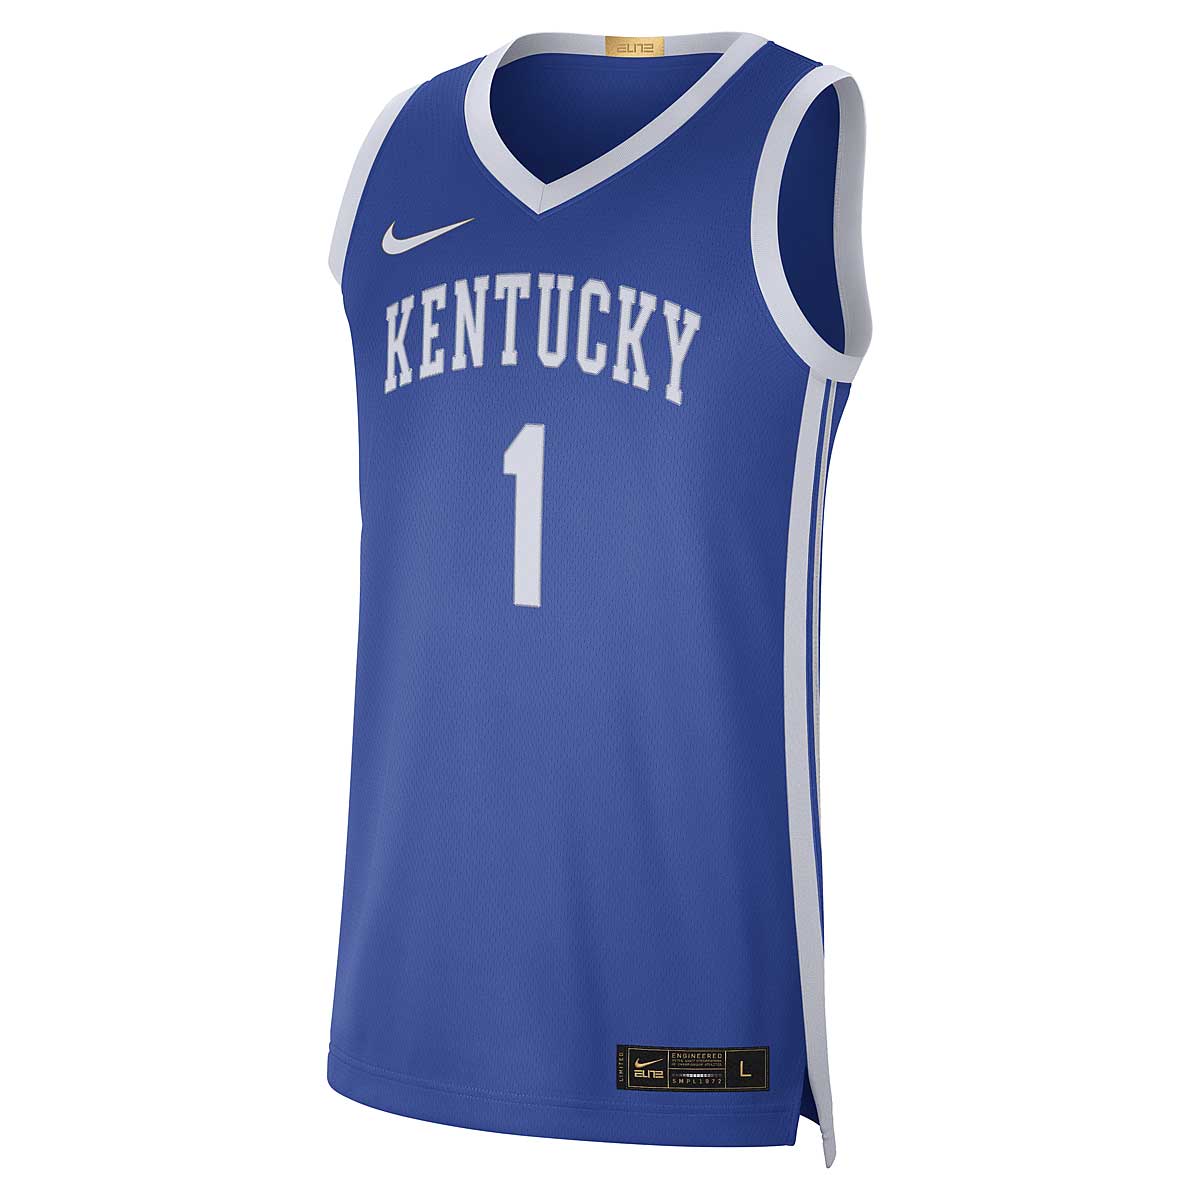 Nike Ncaa Kentucky Wildcats Dri-fit Limited Edition Jersey Devin Booker, Game Royal 2XL